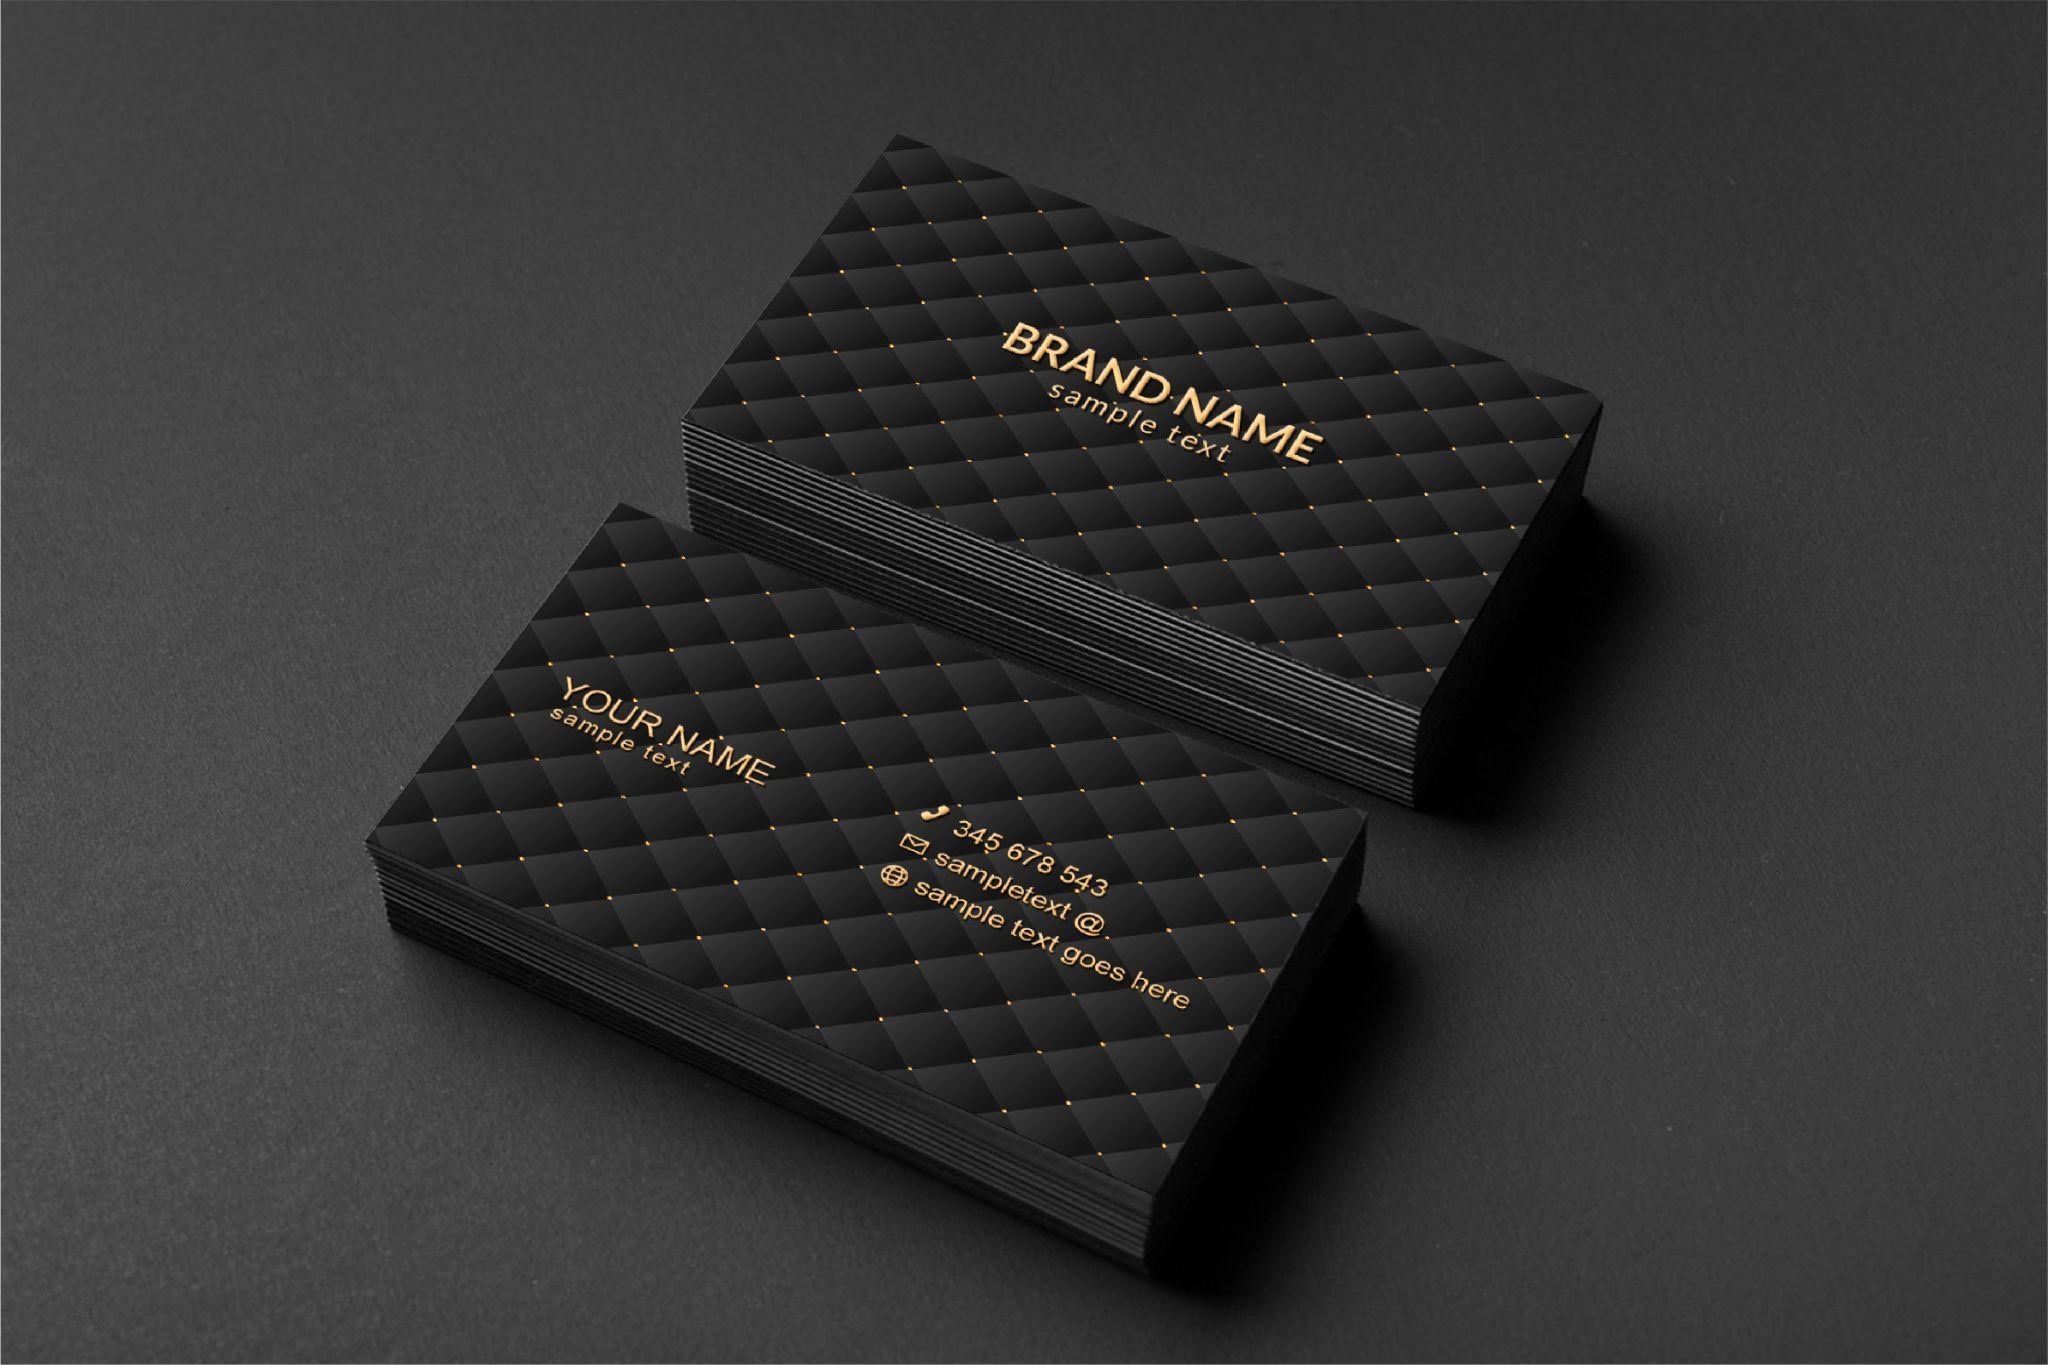 Real estate business cards